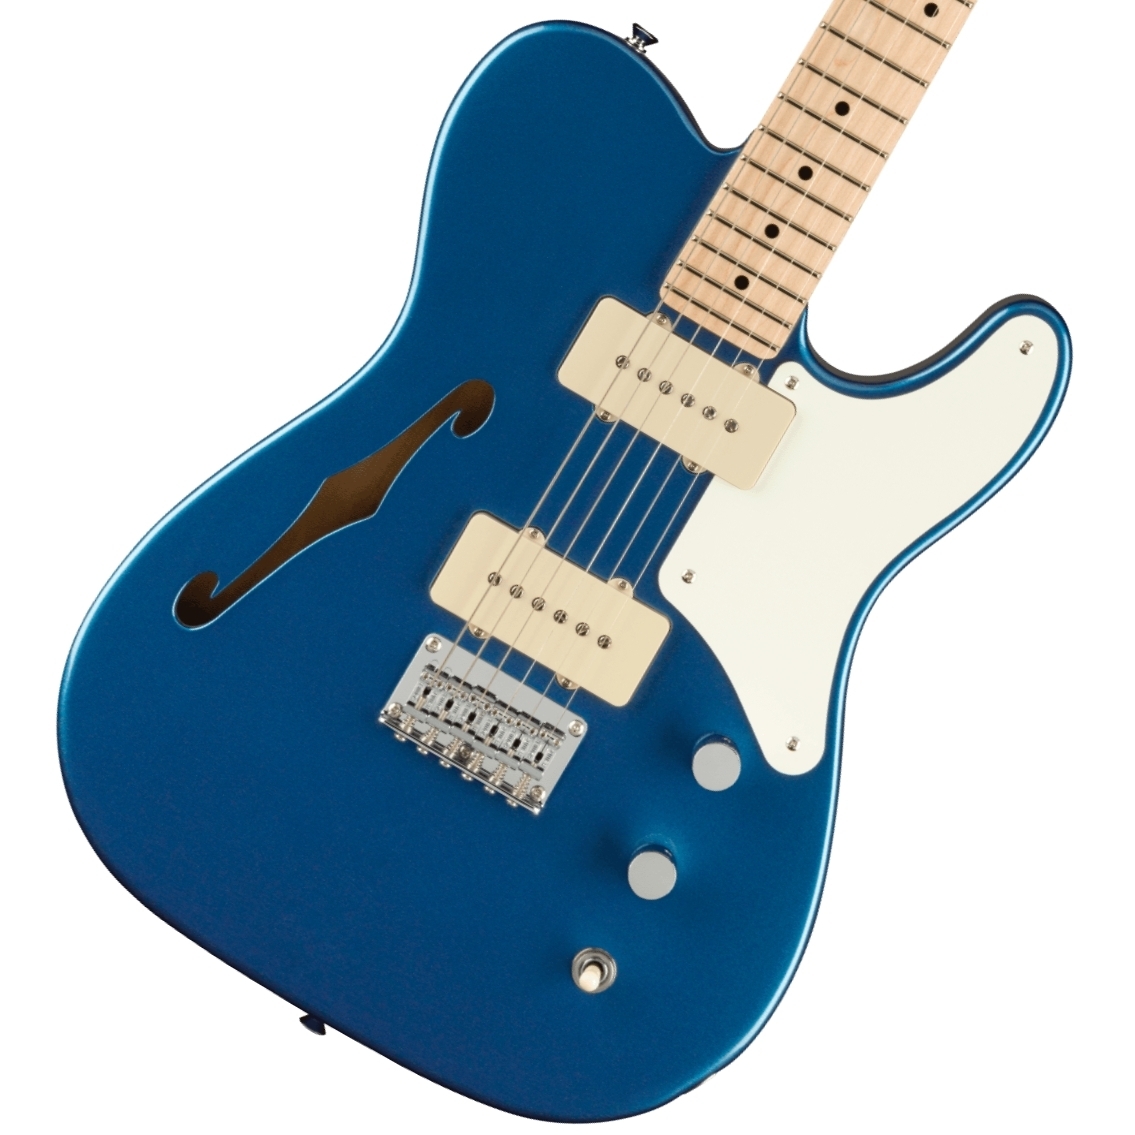 Squier by Fender Paranormal Cabronita Telecaster Thinline Maple Fingerboard  Parchment Pickguard Lake Placid Blue スク（新品/送料無料）【楽器検索デジマート】